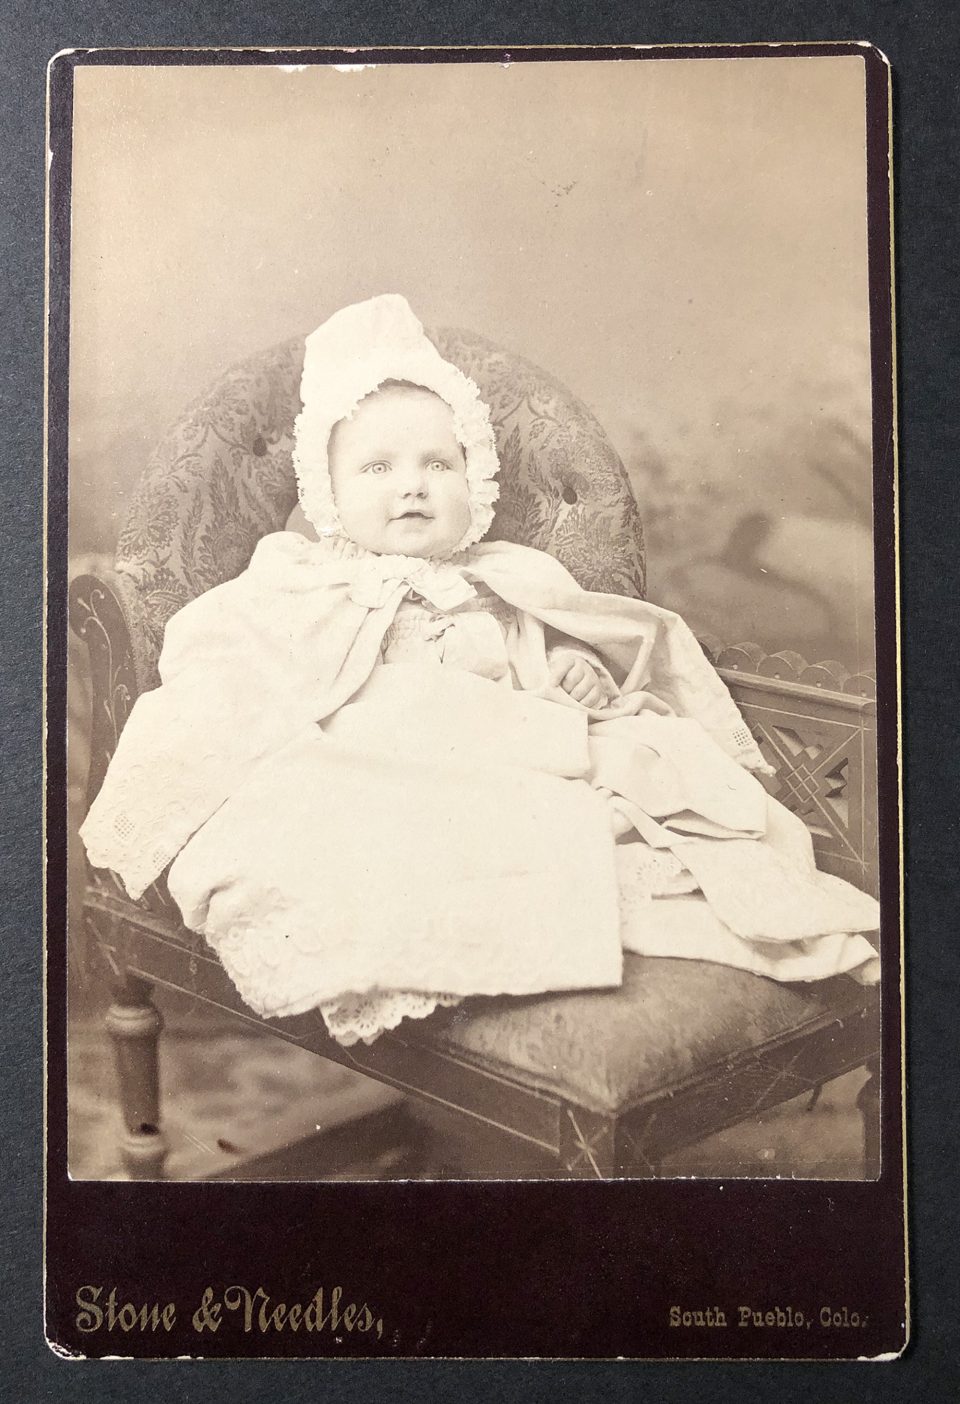 Cabinet card portrait of a smiling infant, photographed by the studio of Stone & Needles in South Pueblo,